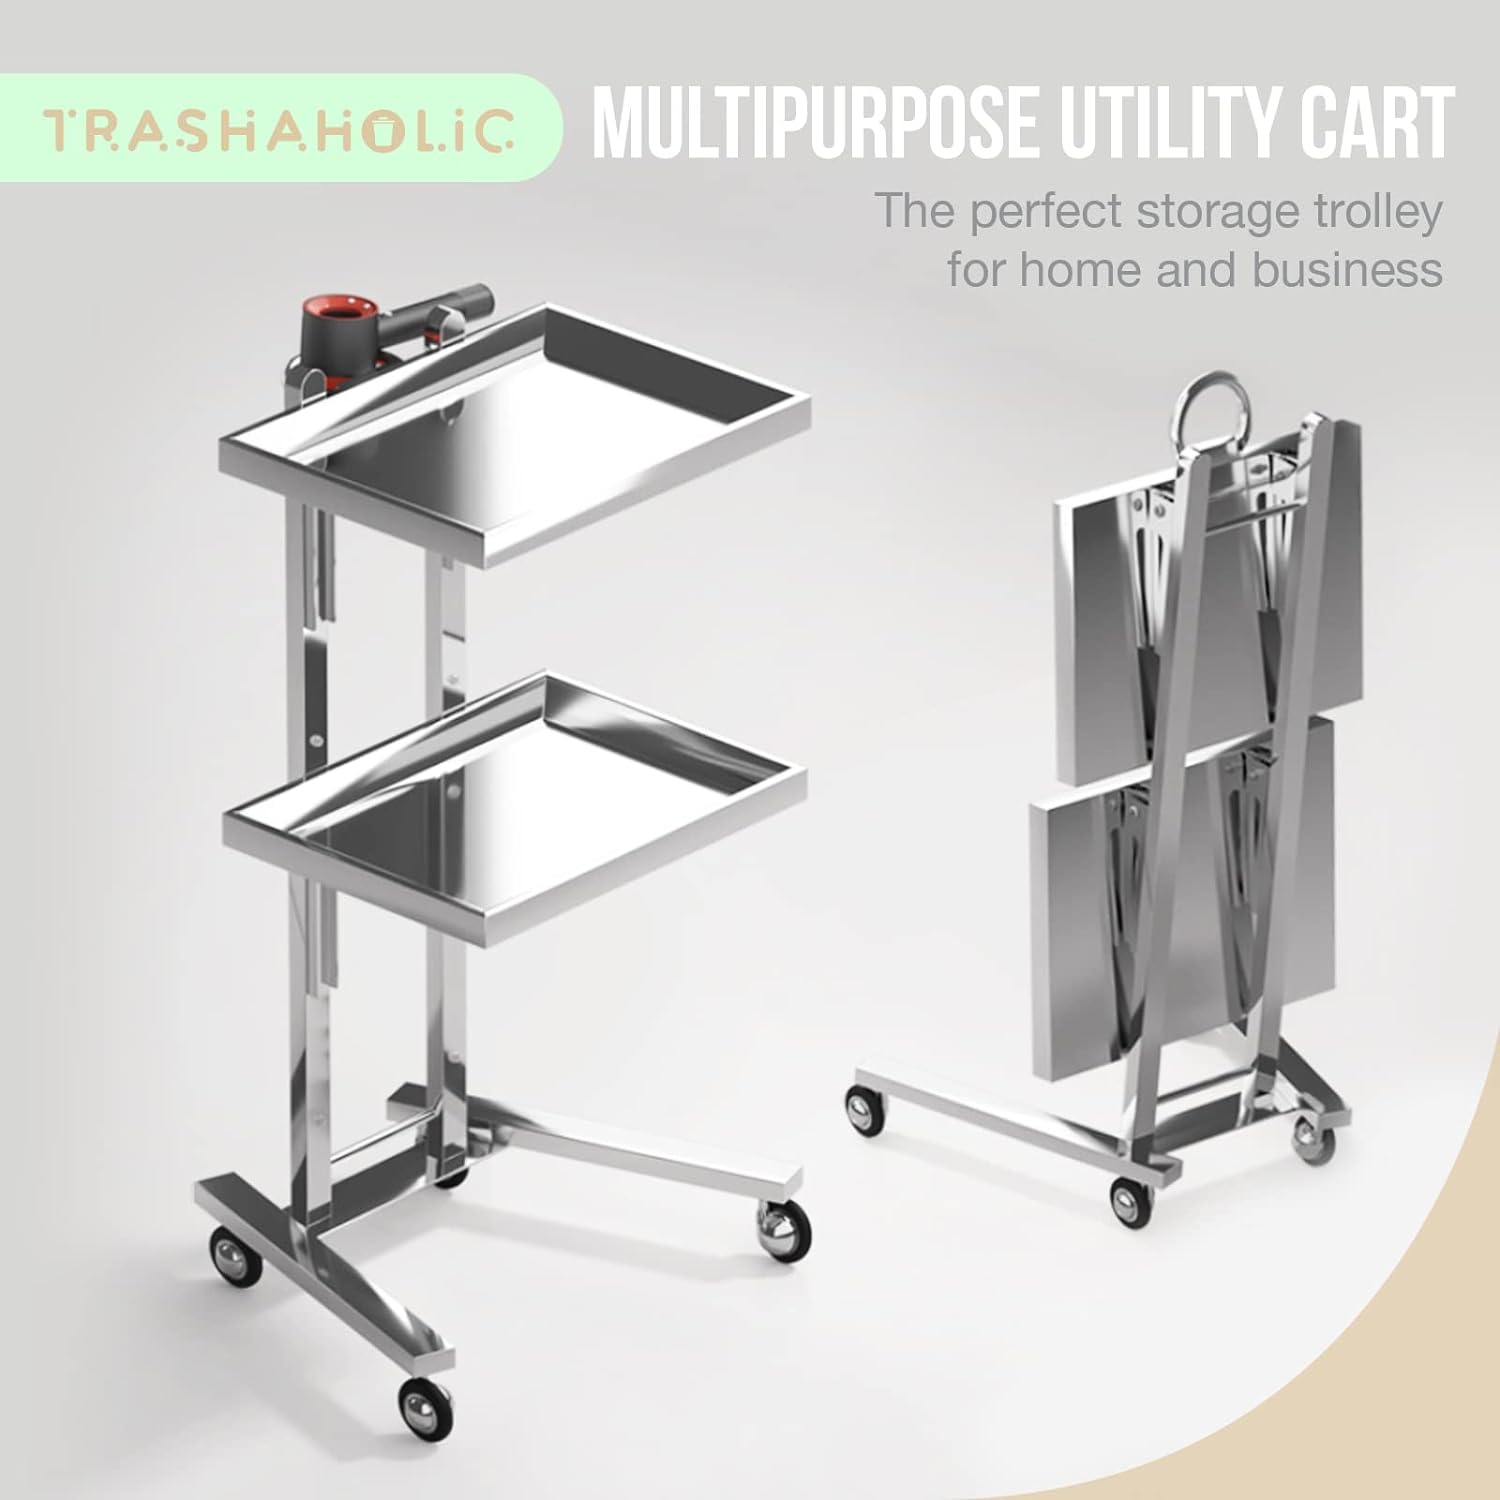 Load image into Gallery viewer, Multipurpose 2-Tray Utility Cart on Wheels - Stainless Steel 2 Level Medical Trolley Cart with Foldable Storage Trays